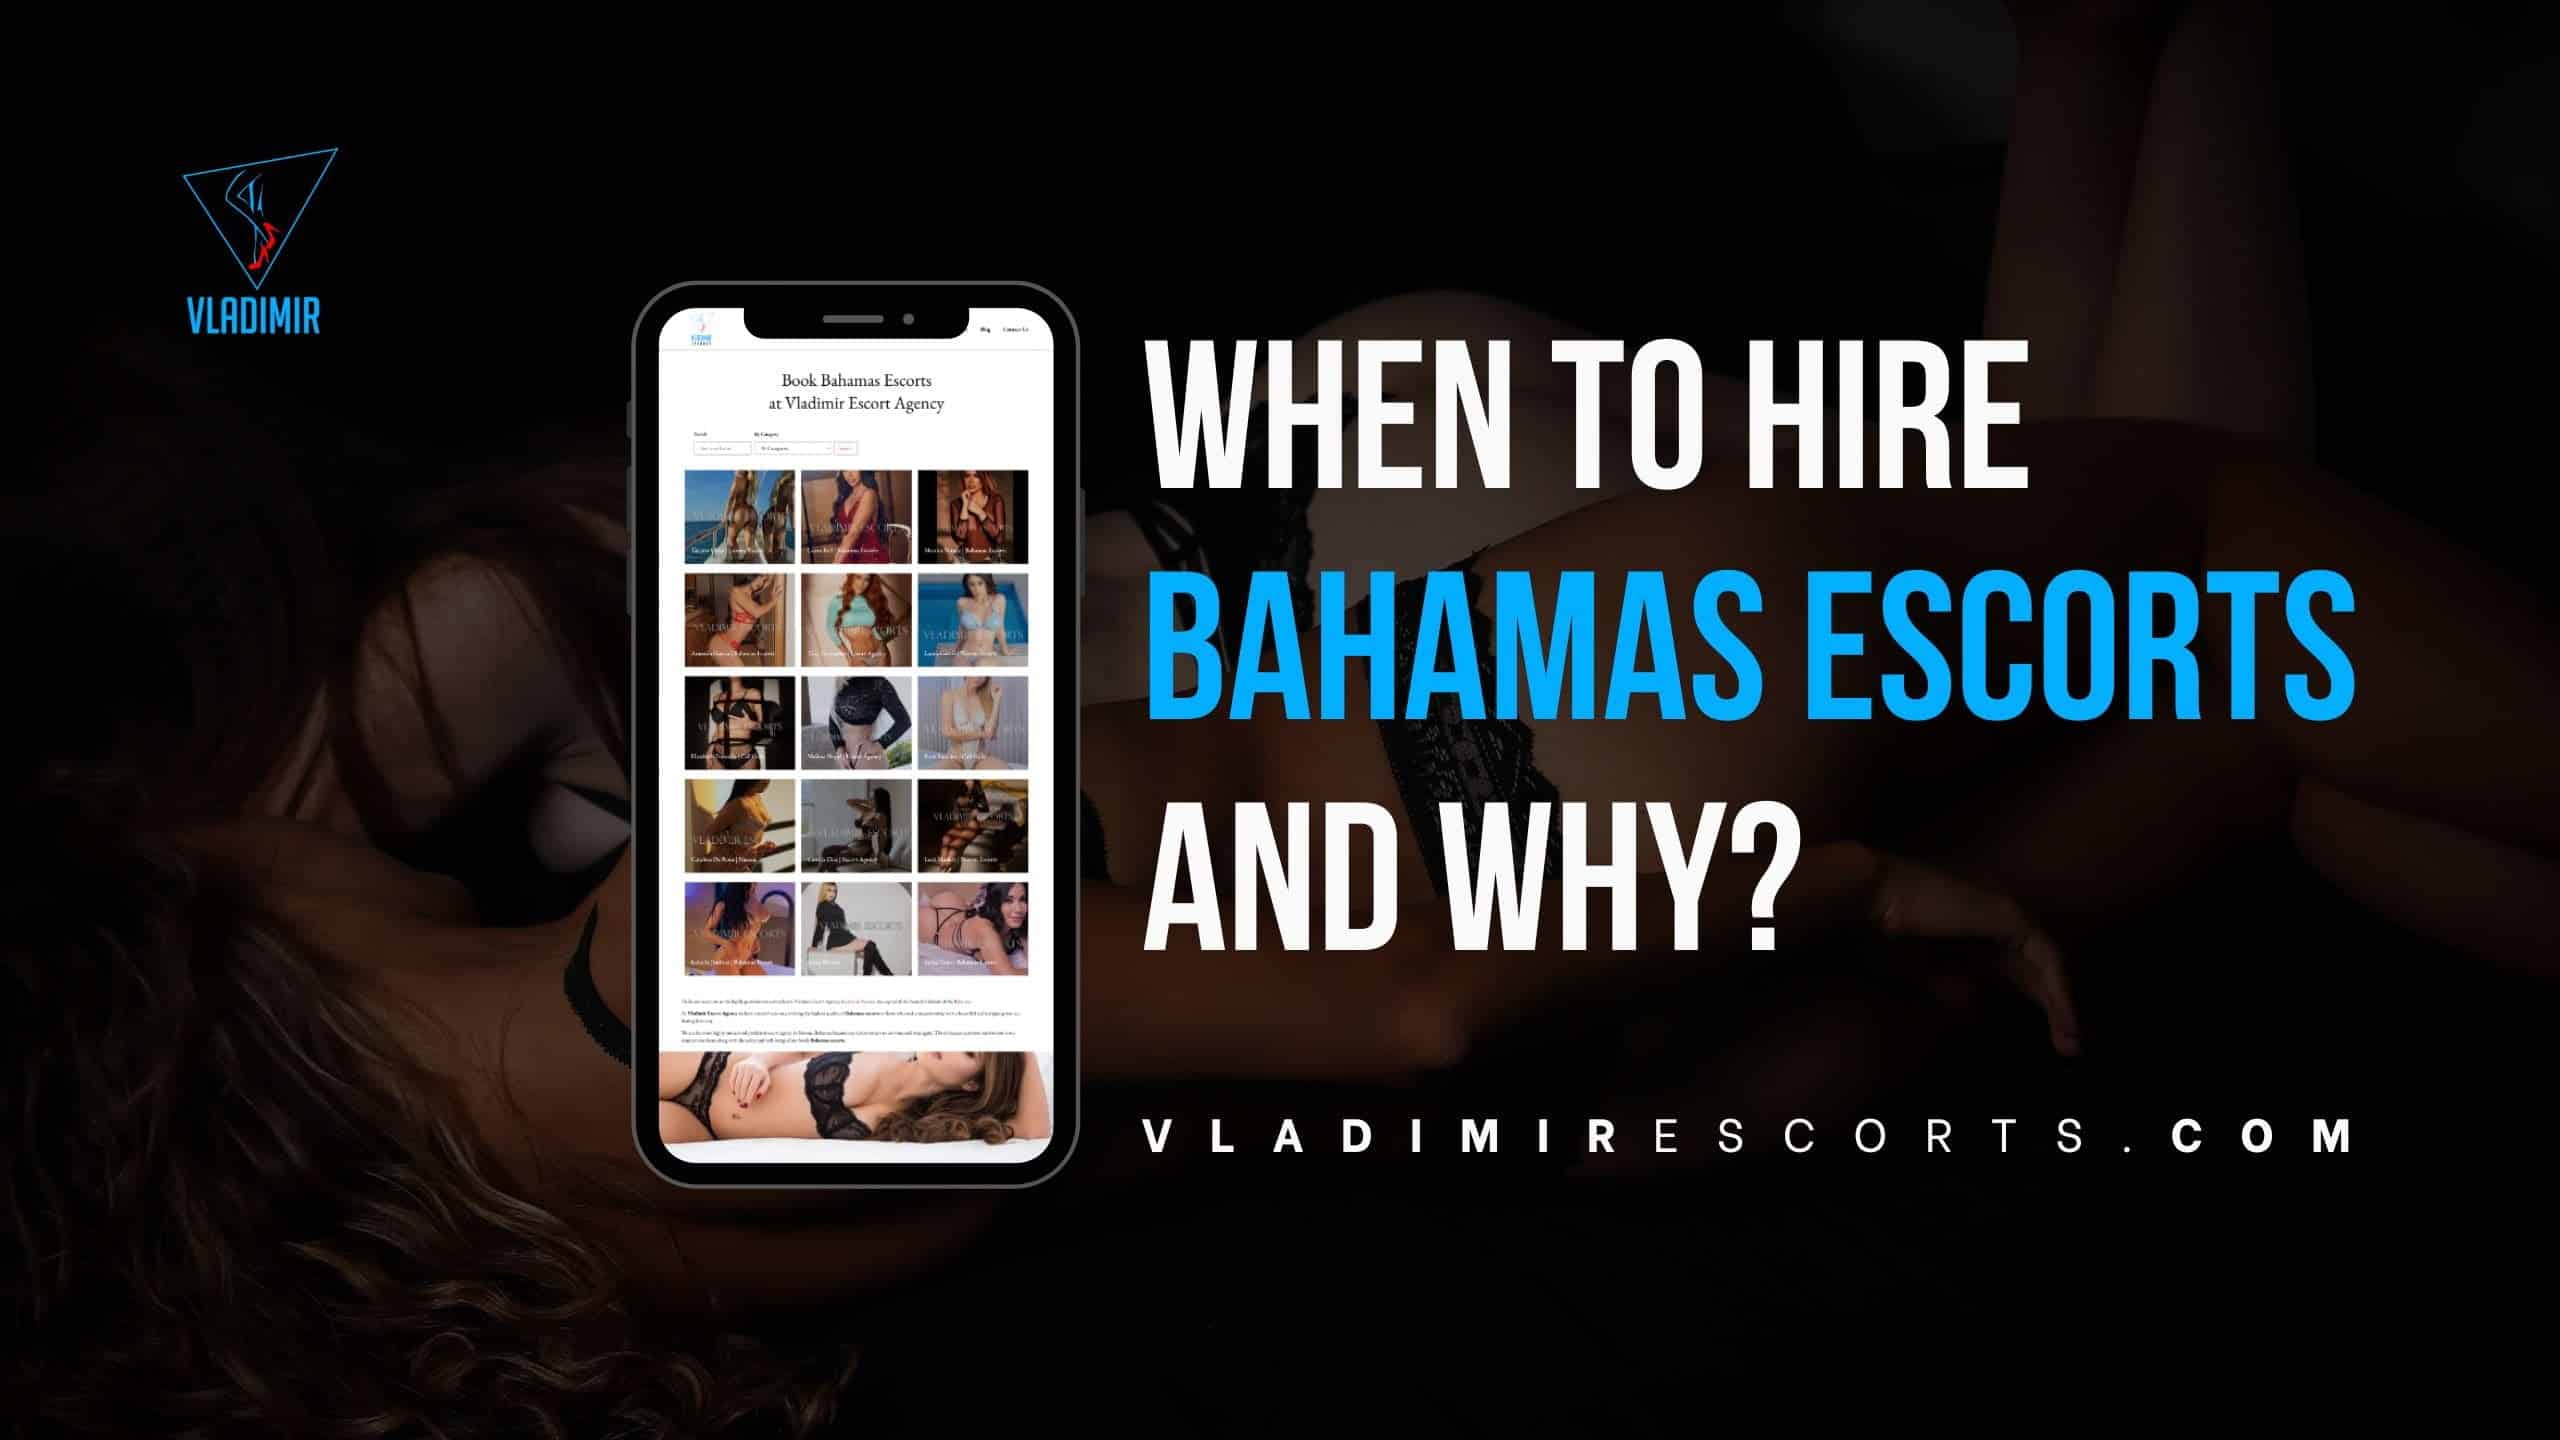 When Should You Hire Bahamas Escorts and Why?